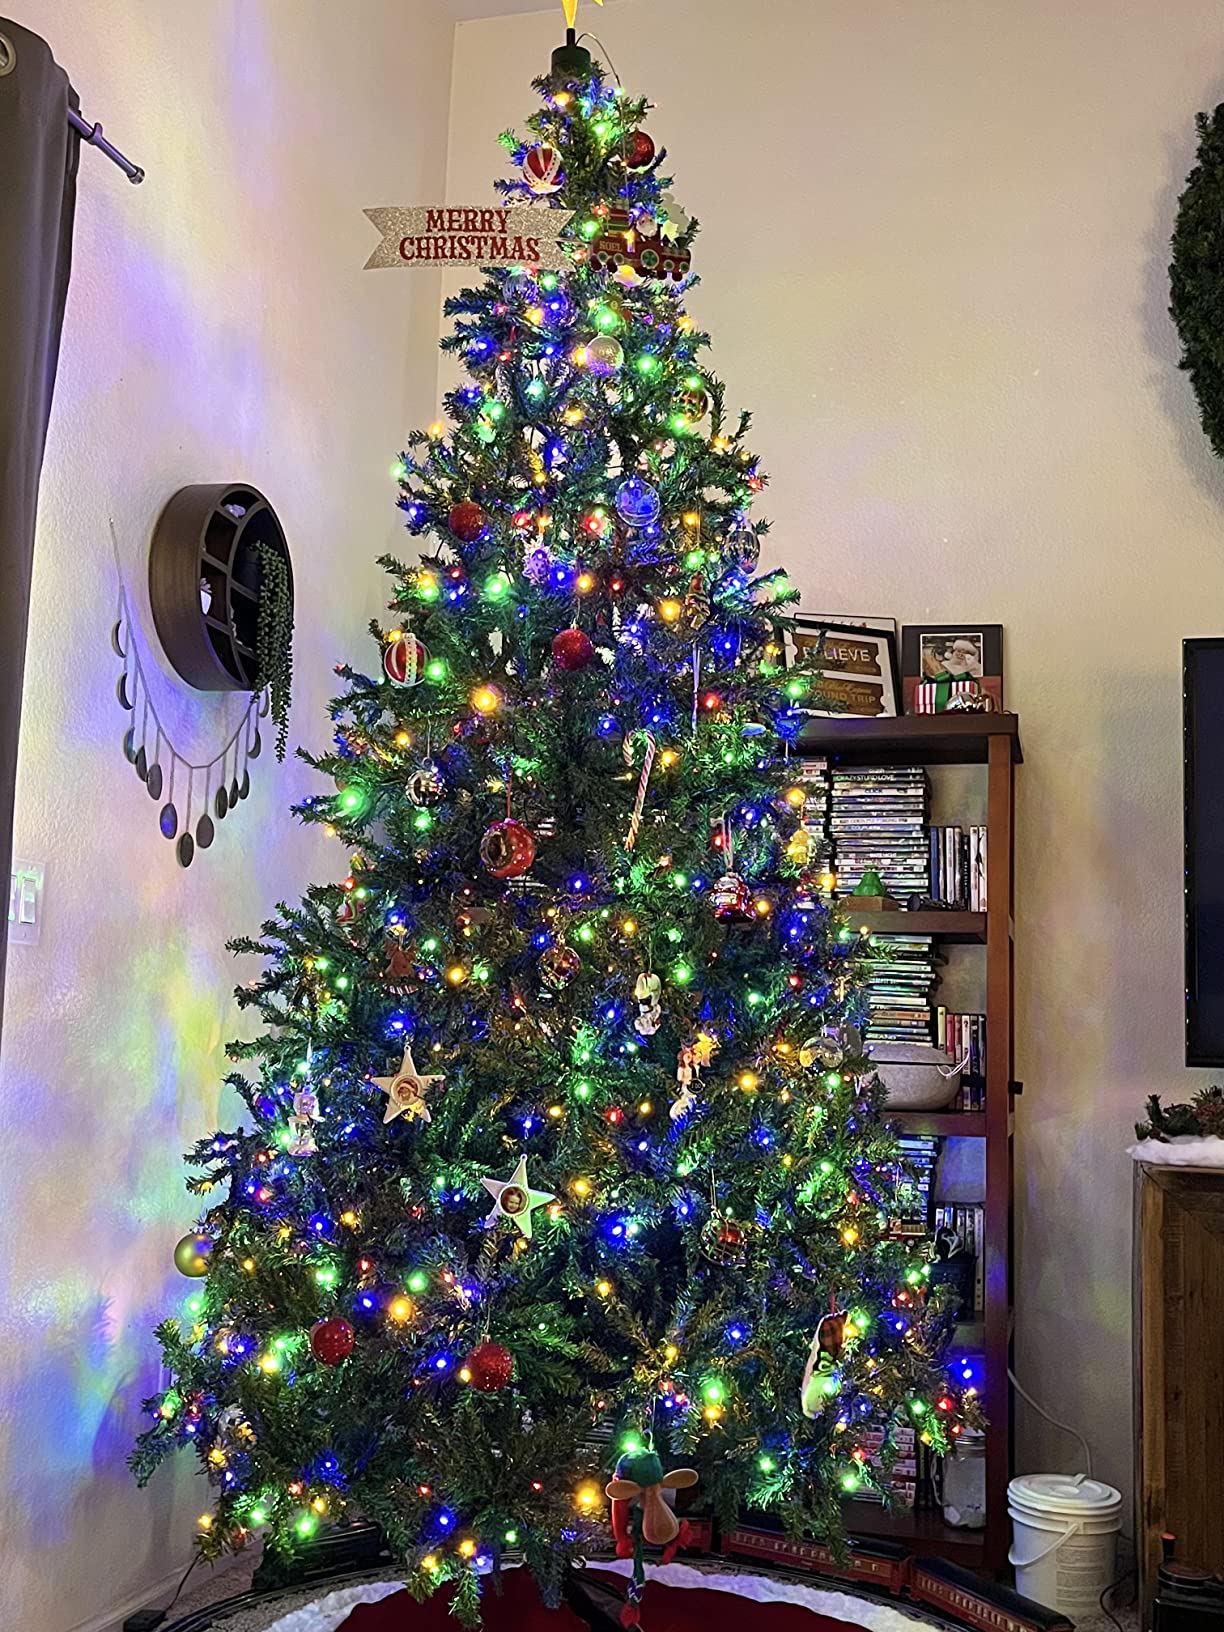 Great tree for great price!